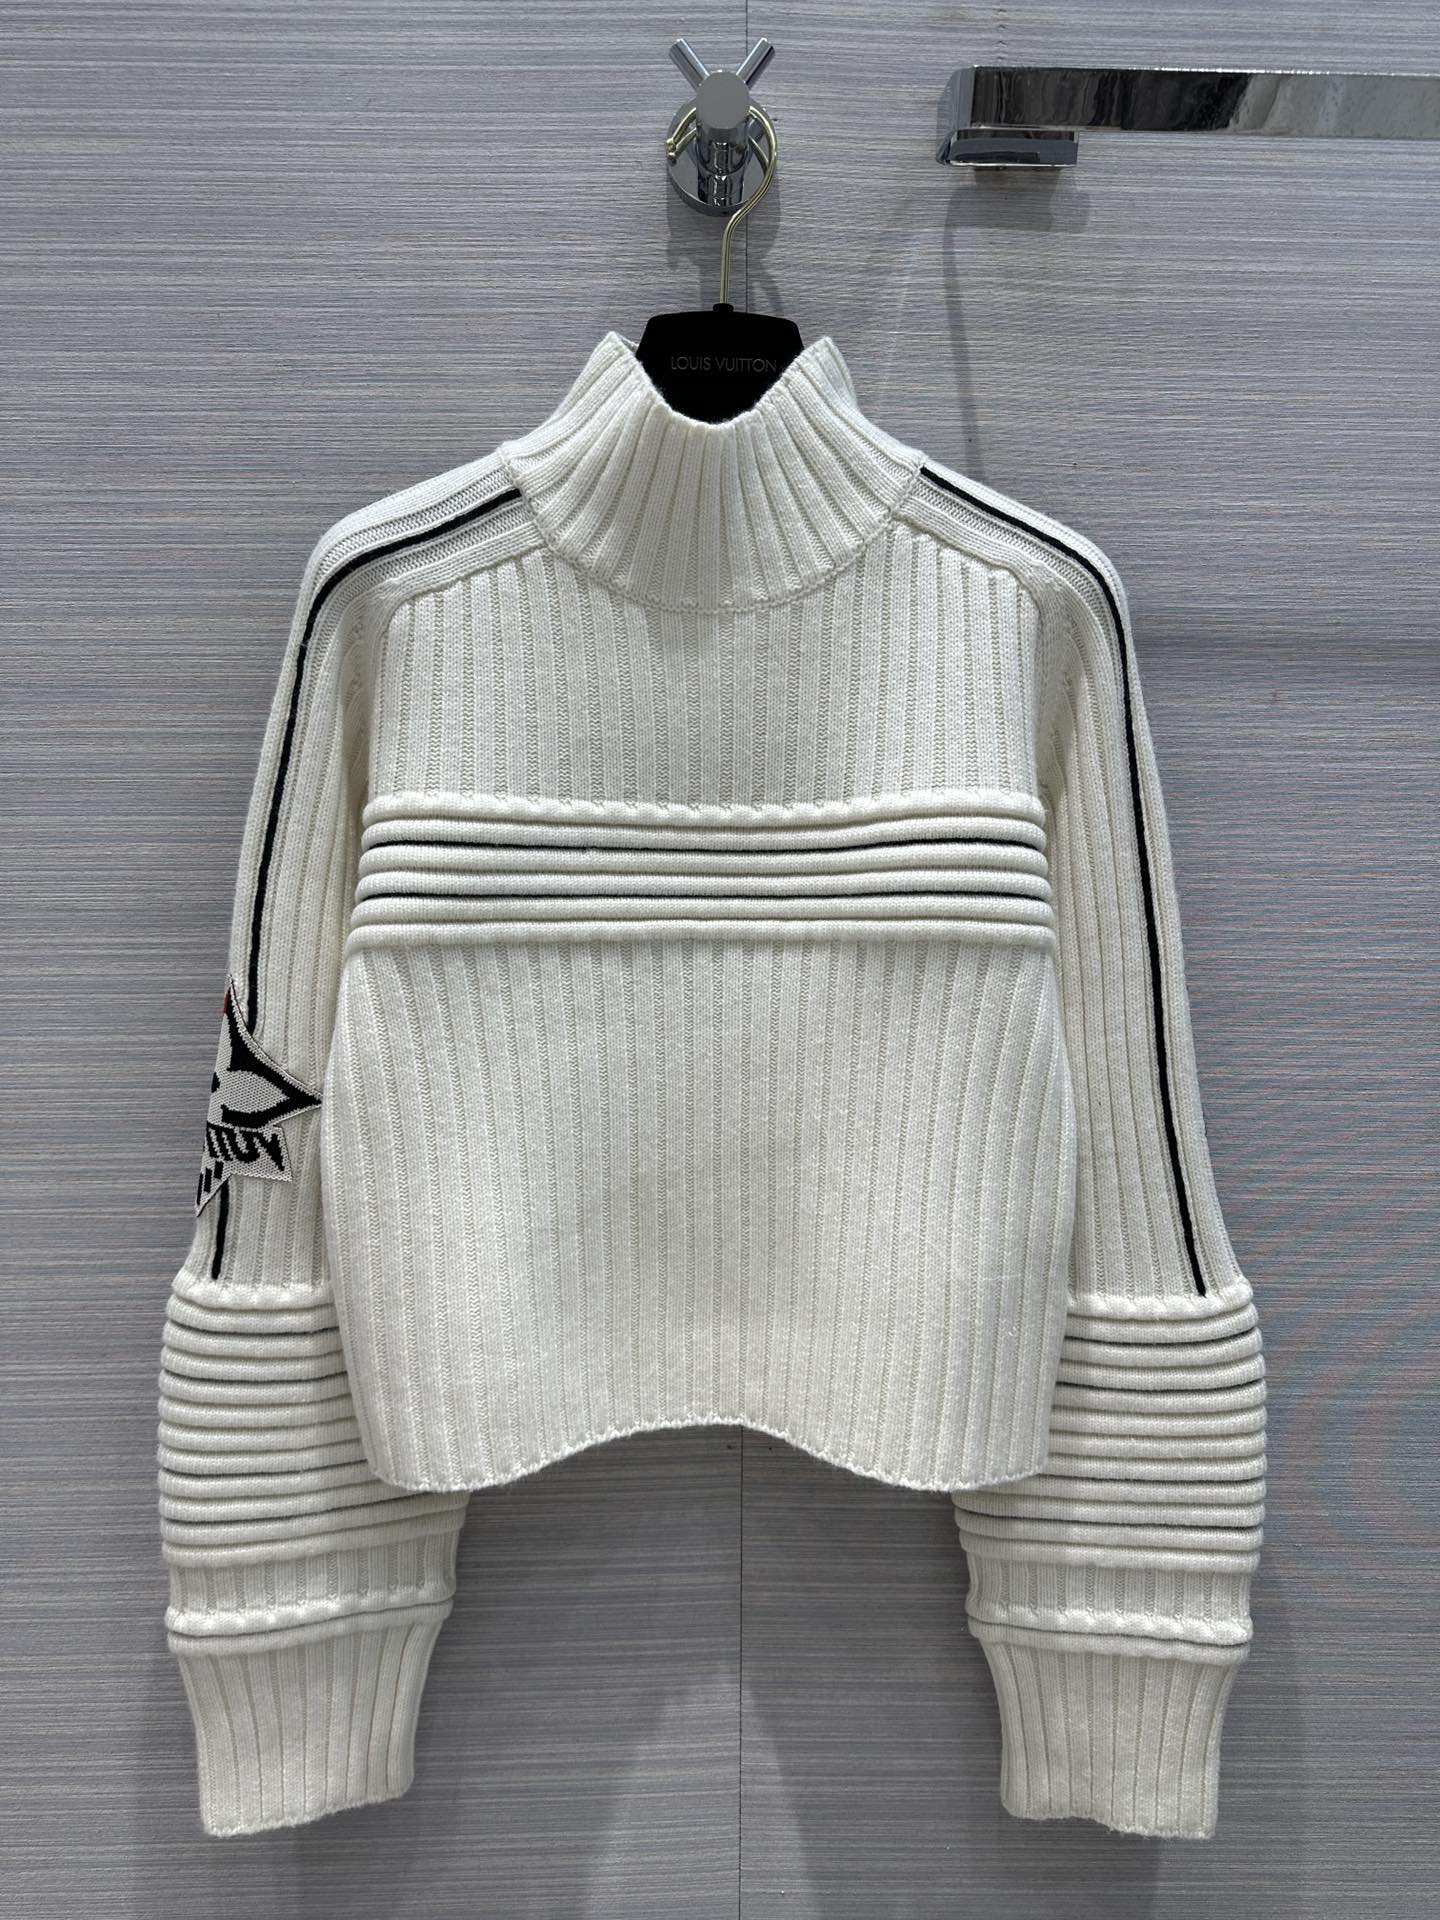 Louis Vuitton Clothing Knit Sweater Sweatshirts White Cashmere Knitting Fall/Winter Collection